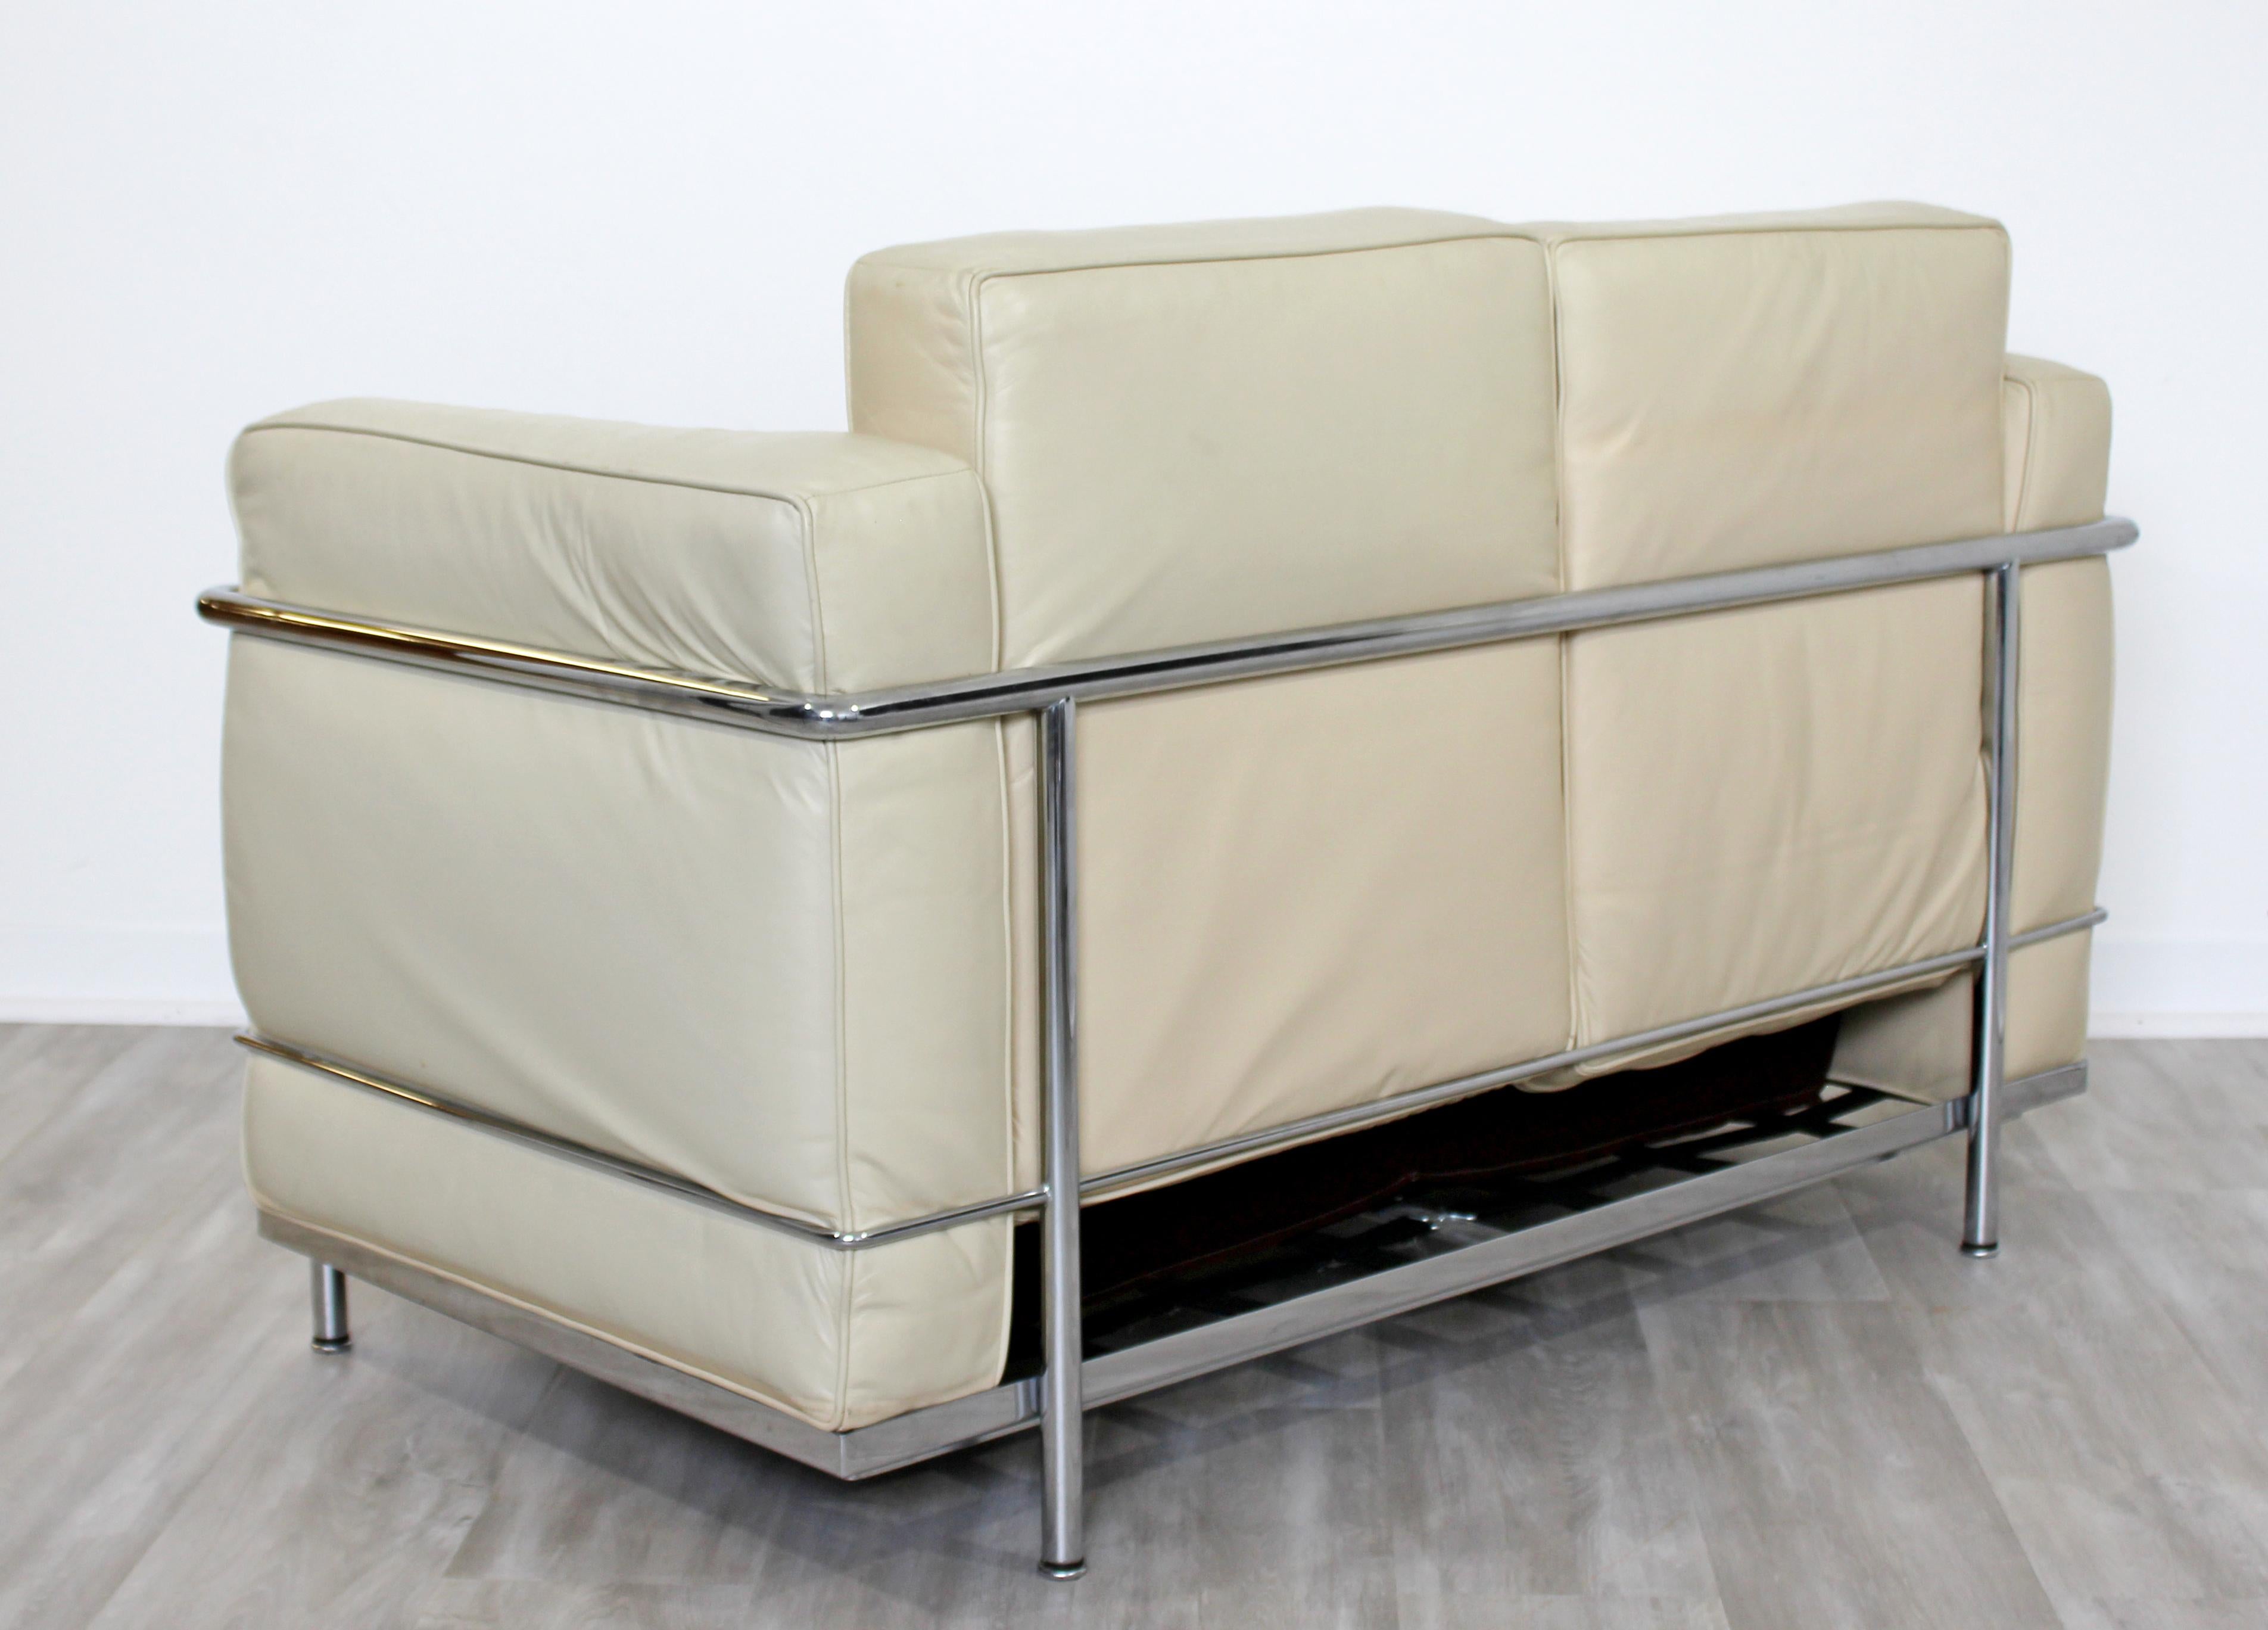 20th Century Modern Contemporary Le Corbusier Cream Leather and Chrome Loveseat Sofa Italy